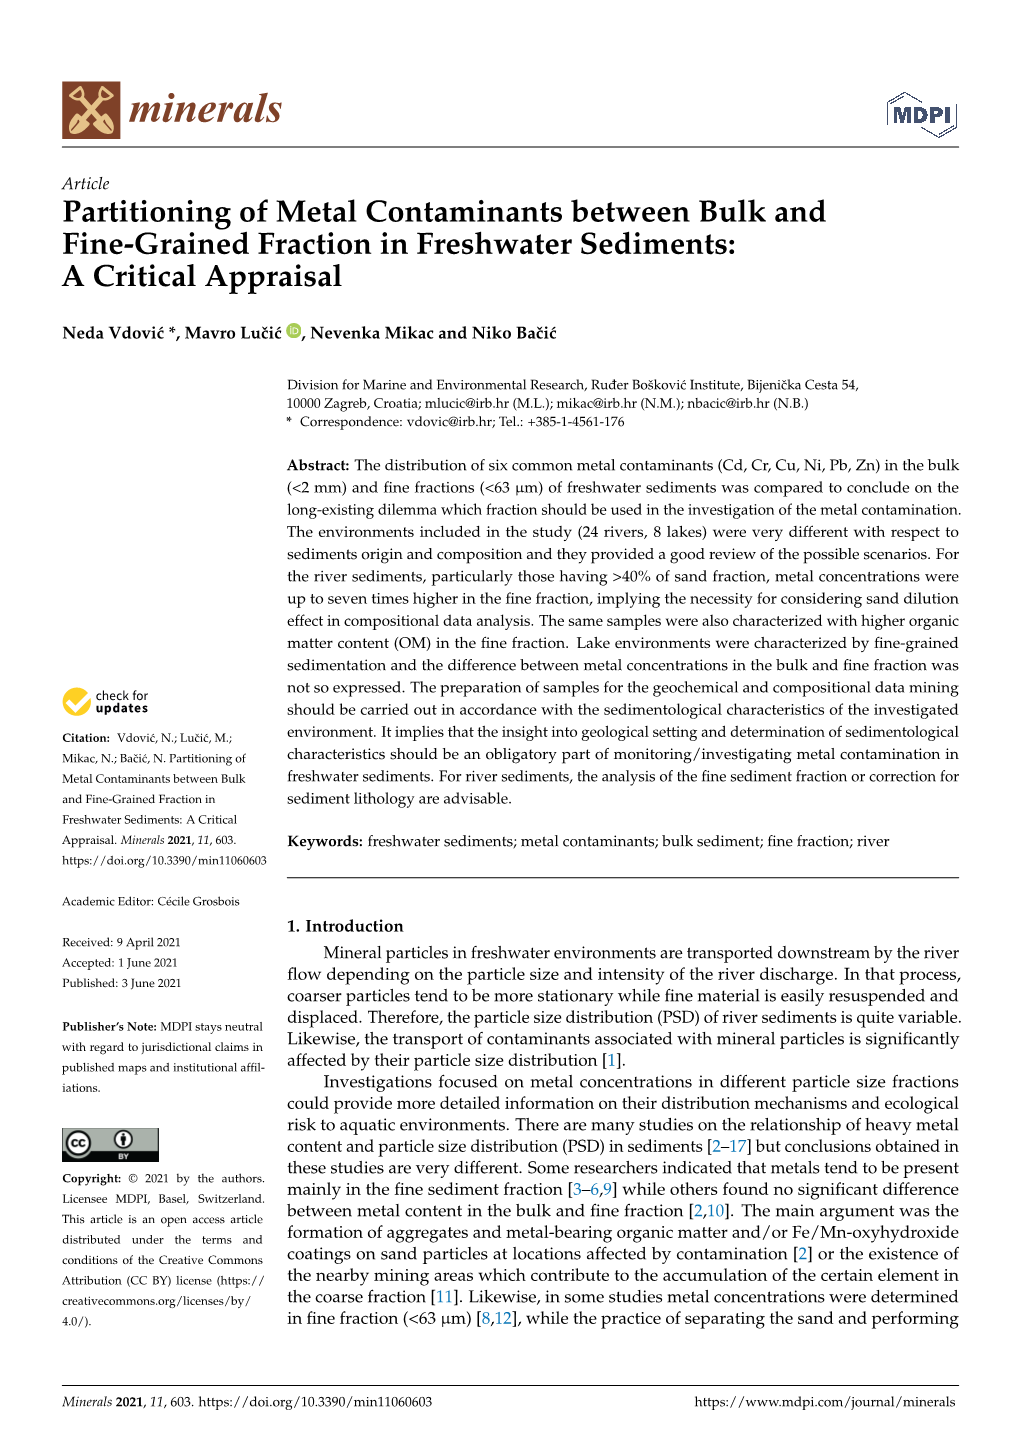 Partitioning of Metal Contaminants Between Bulk and Fine-Grained Fraction in Freshwater Sediments: a Critical Appraisal